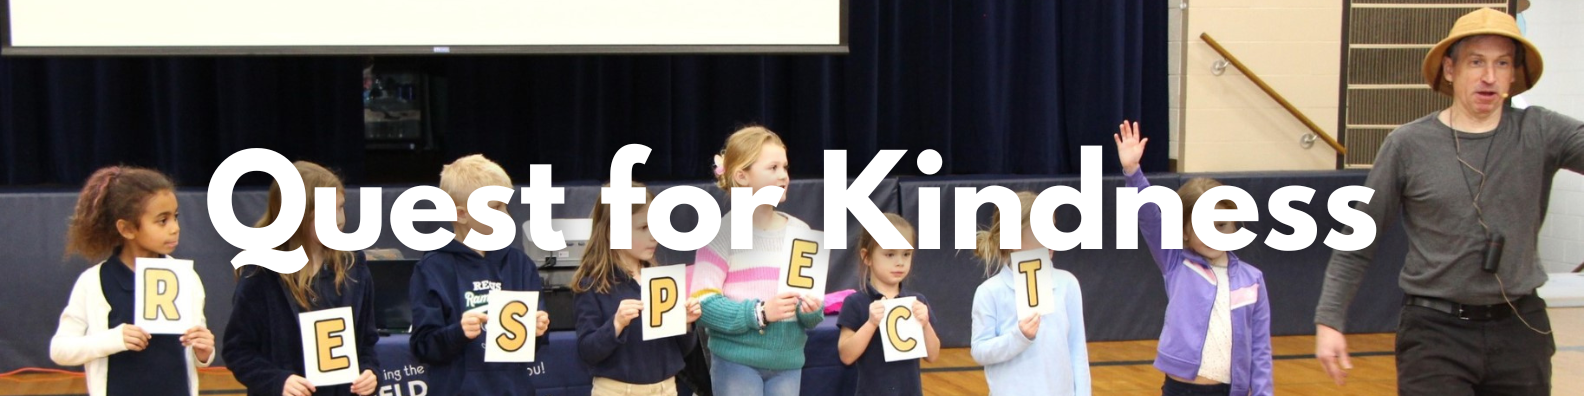 Quest for Kindness Banner (2)